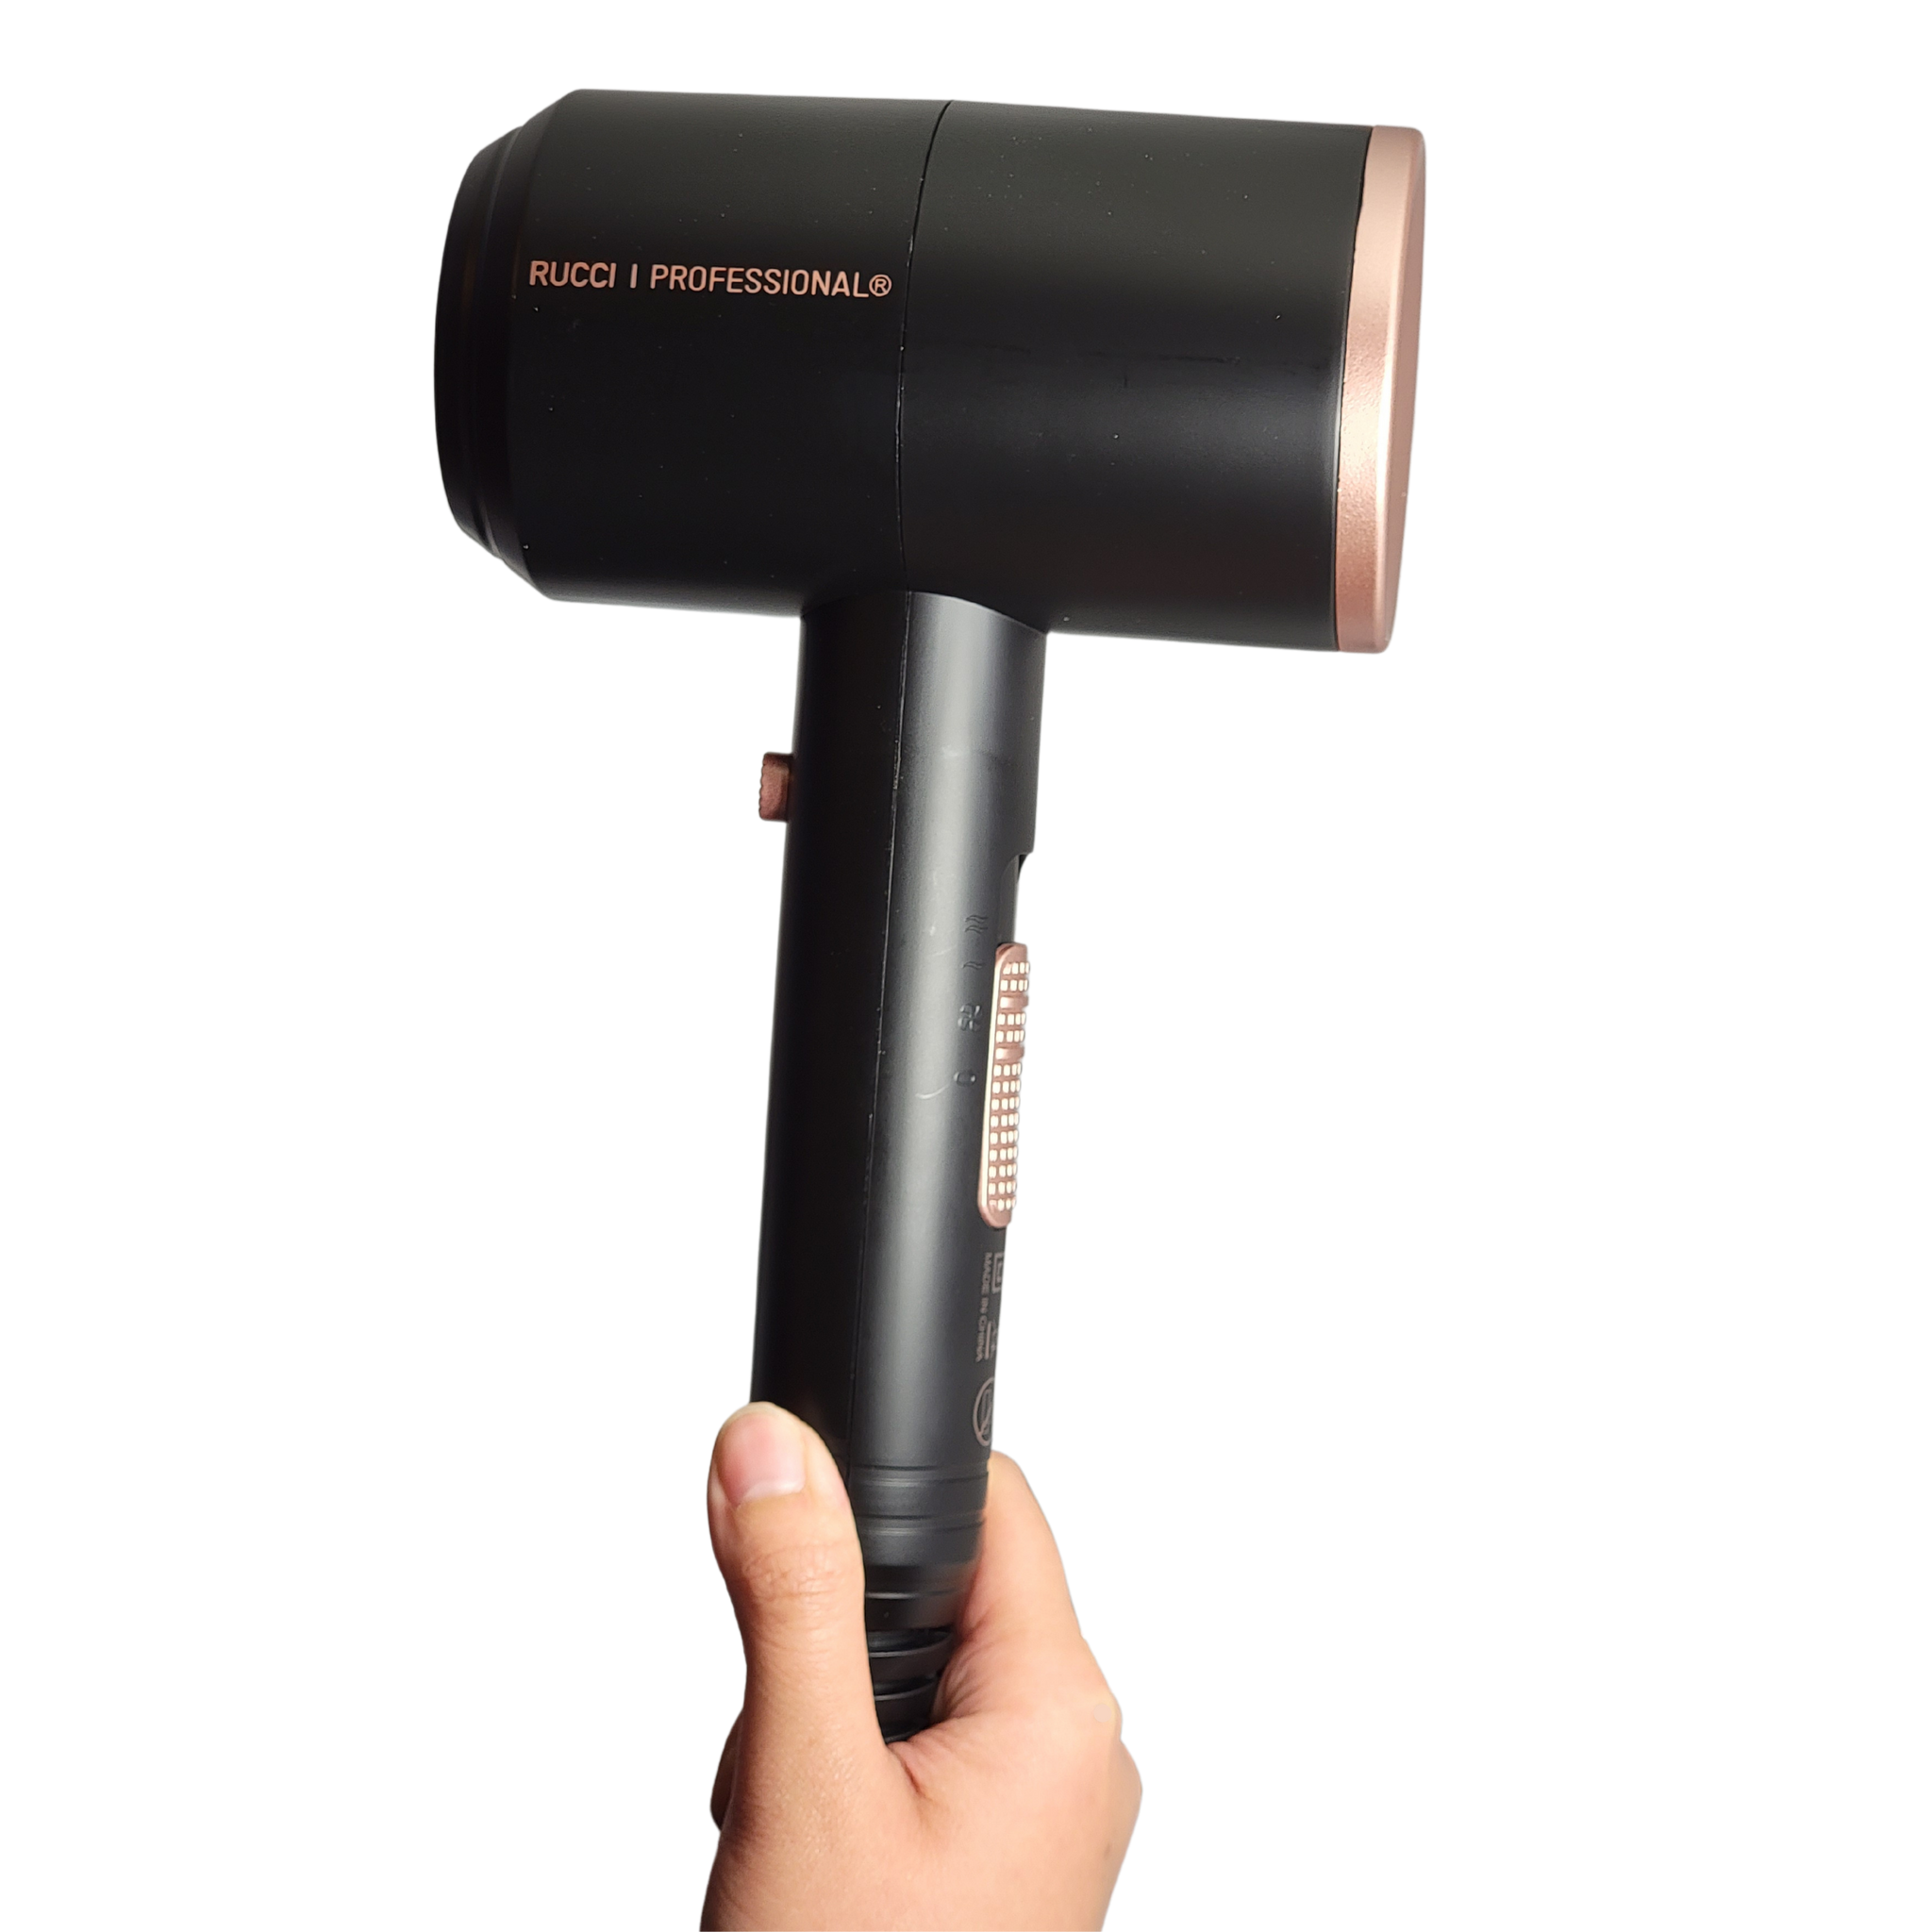 Ultrasonic Hair Dryer, RUCCI Professional 1600W Ionic Blow Dryer Negative Ion Fast Drying for Hair Care, 2 Nozzles Attachment